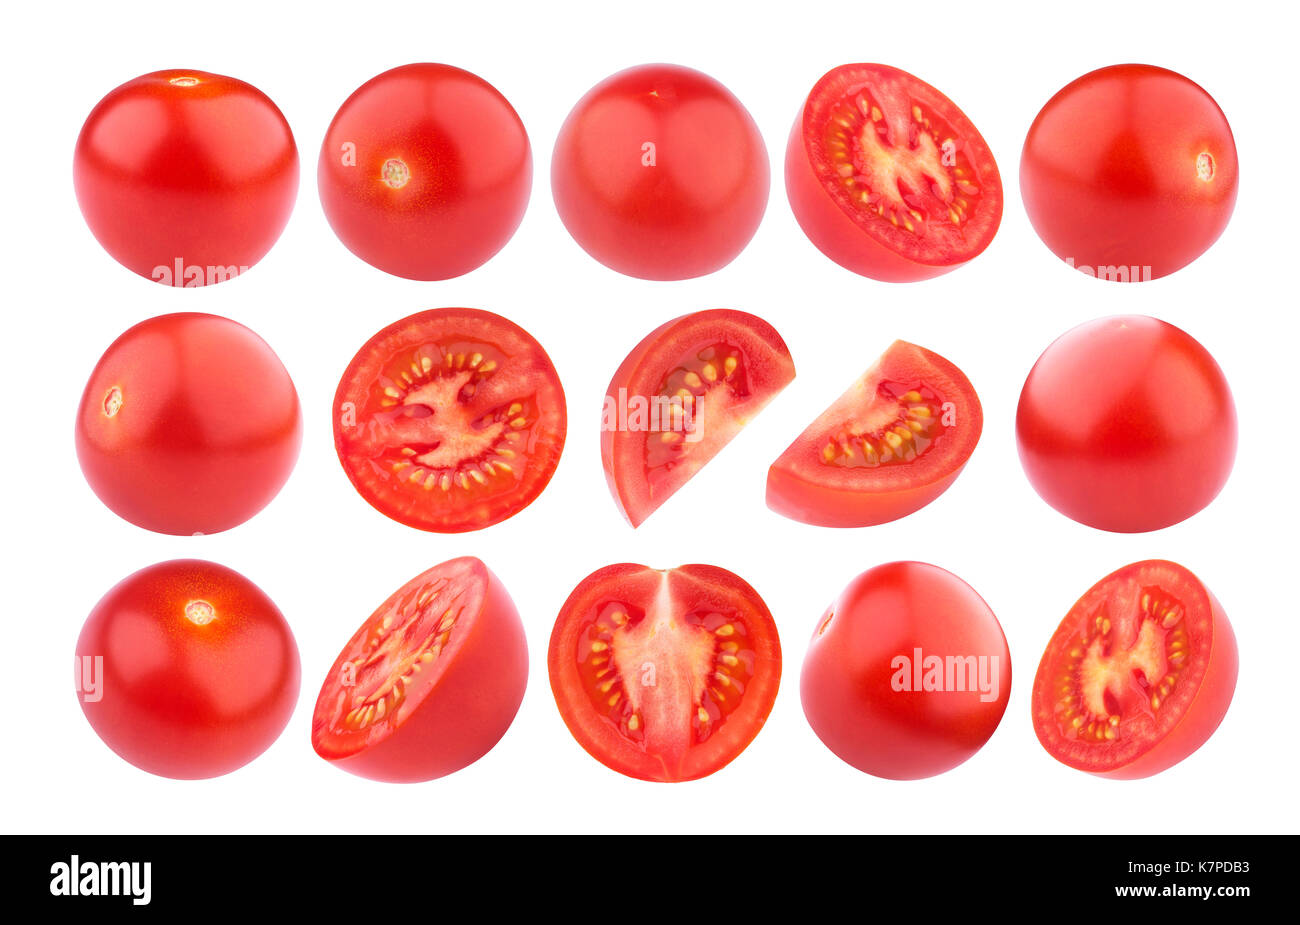 Cherry tomato isolated on white background. Collection Stock Photo